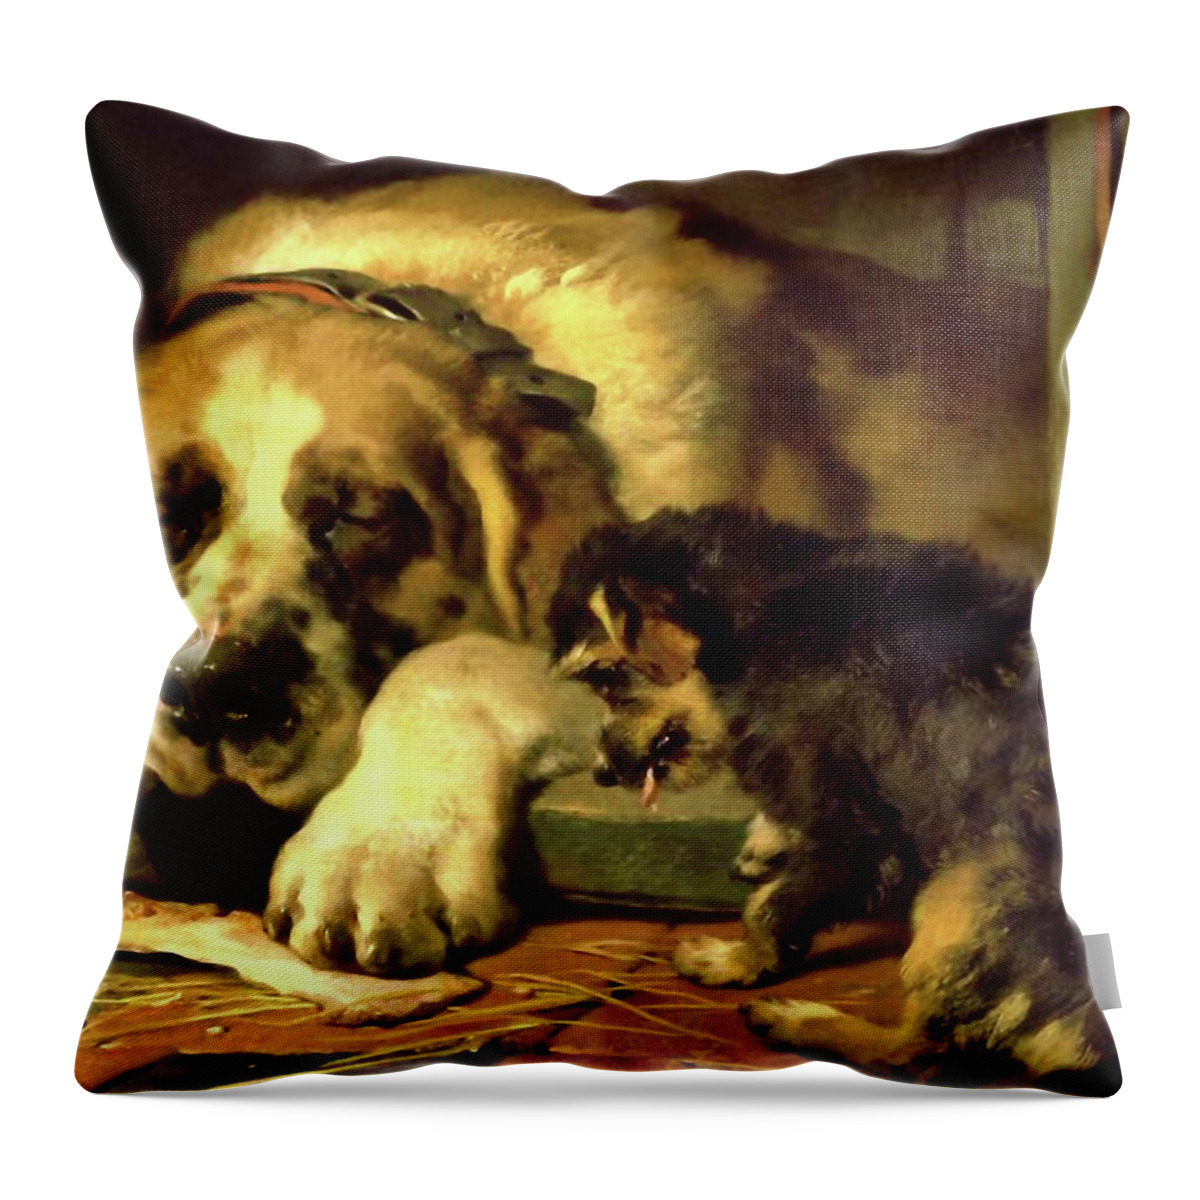 Grooming Throw Pillow featuring the mixed media Dogs - Doubtful Crumbs by Edwin Landseer